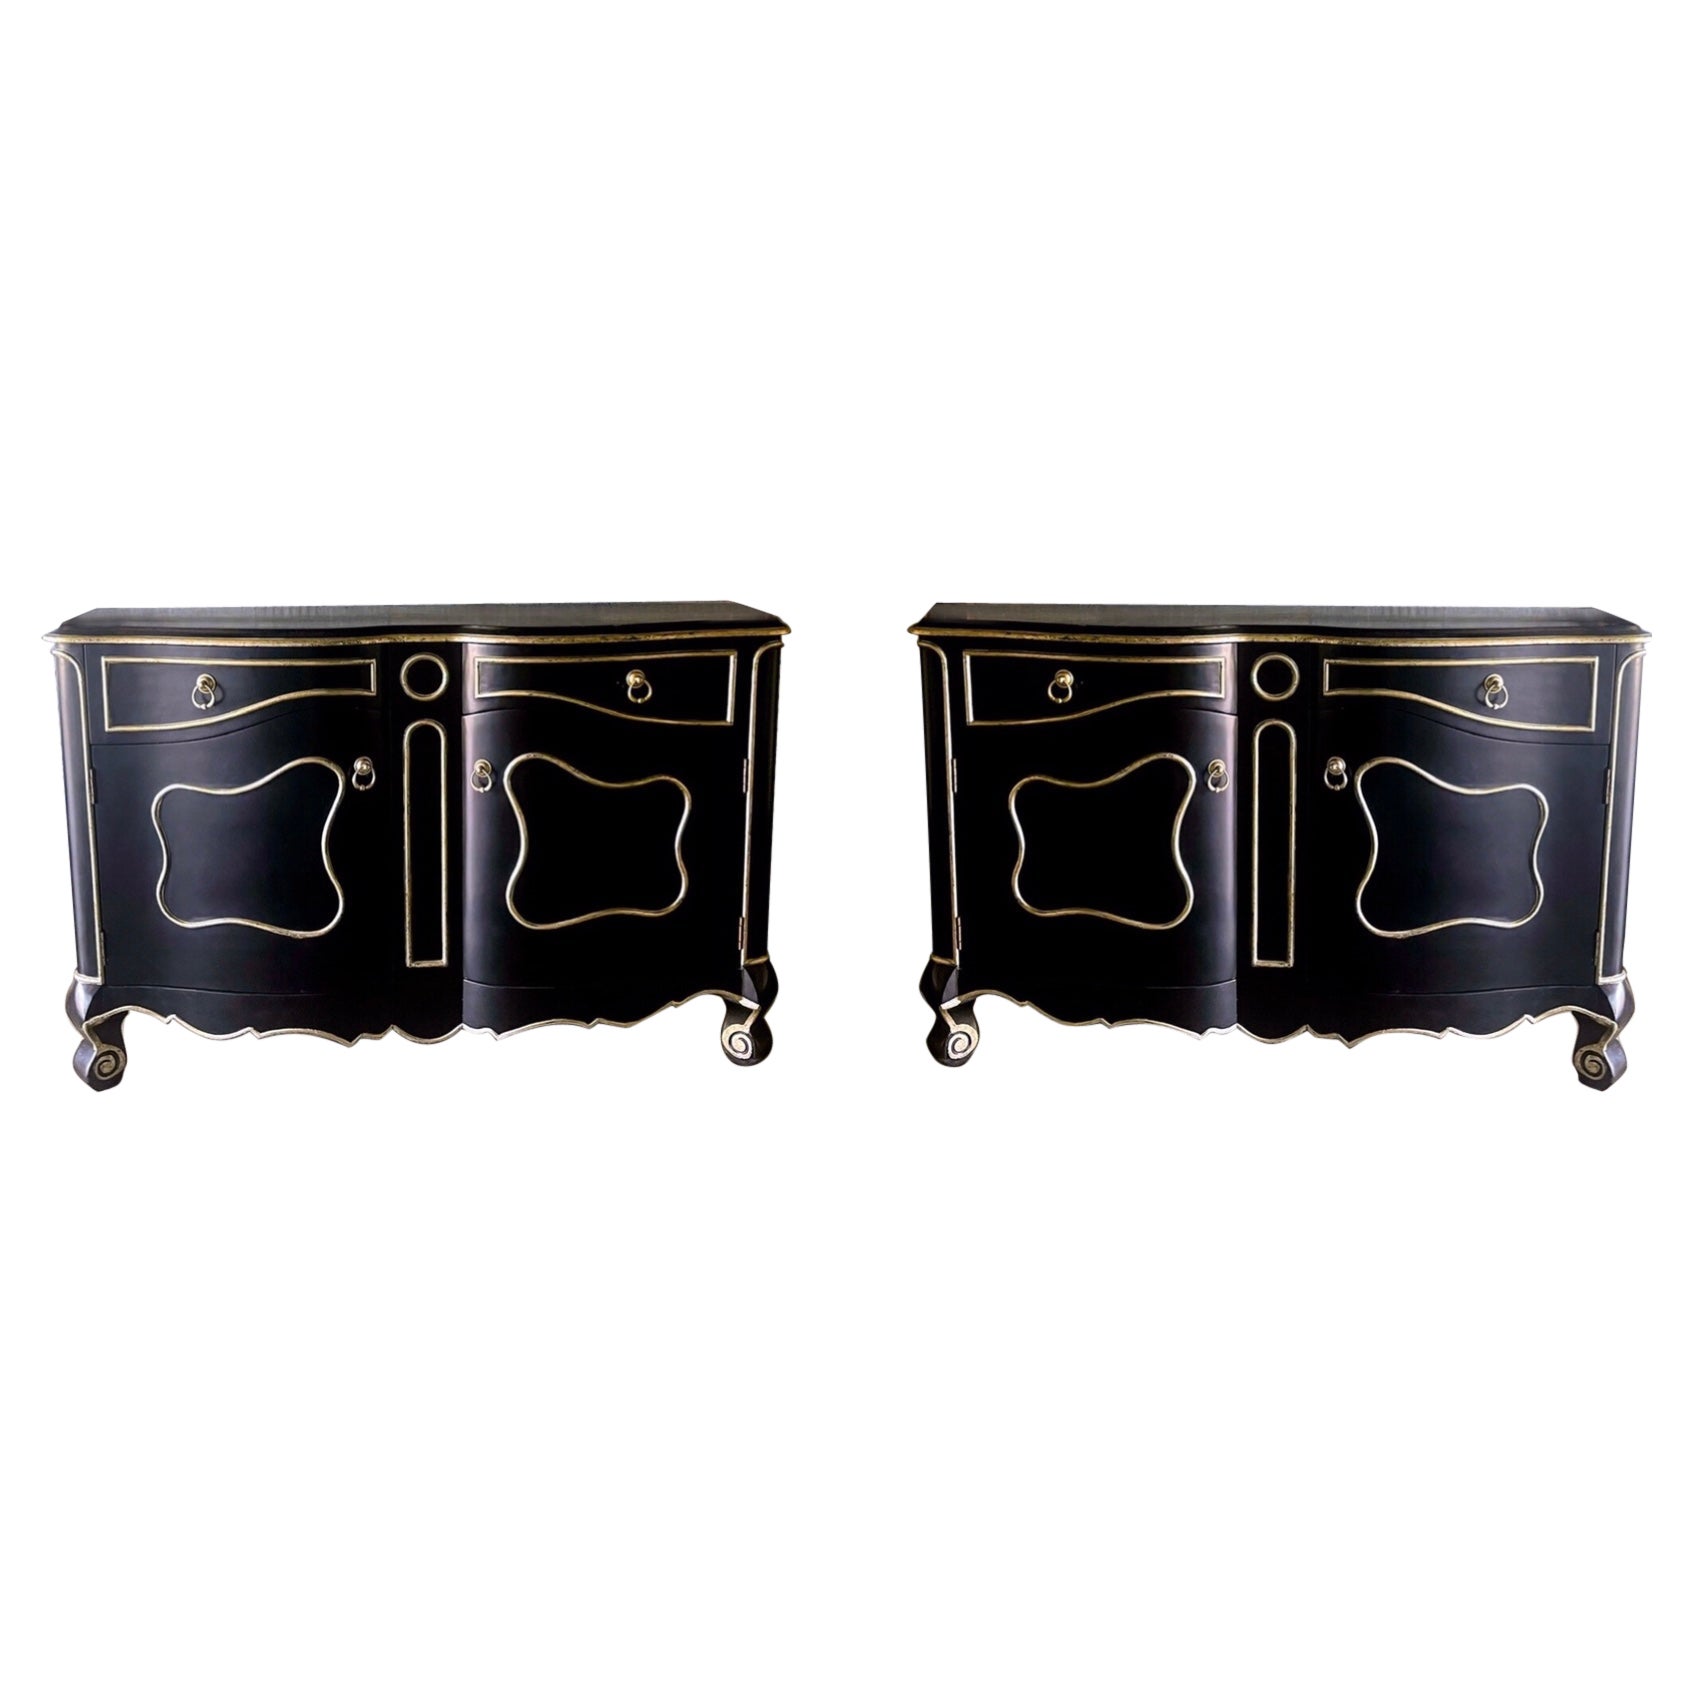 Late 20th-C. Modern French Louis XV Cabinet in Black and Silver Gilt, Pair